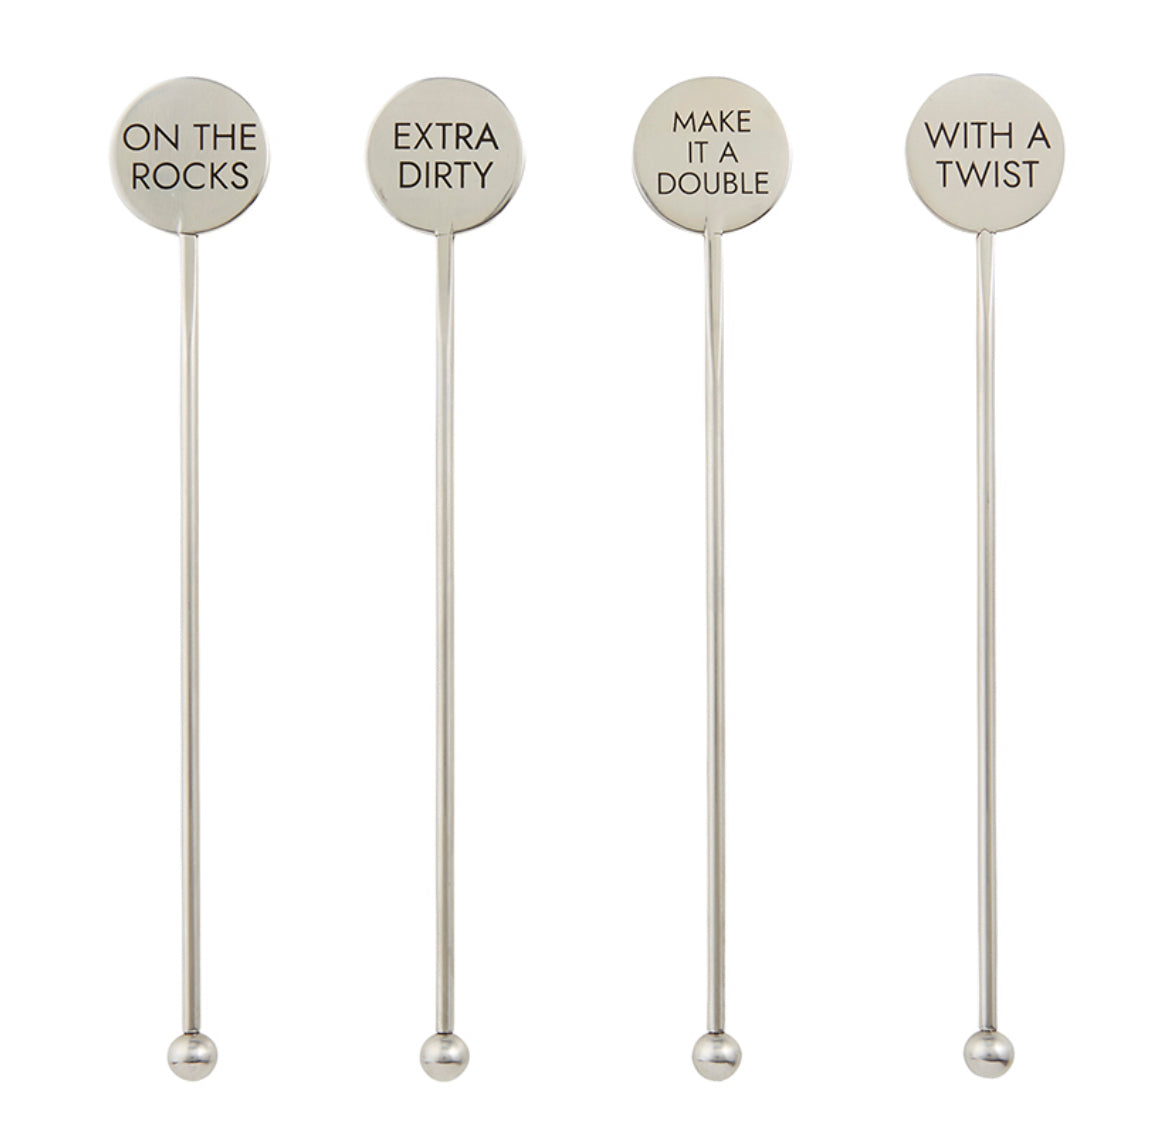 Stainless Steel Stir Sticks - On the rocks, extra dirty, make it a double, with a twist